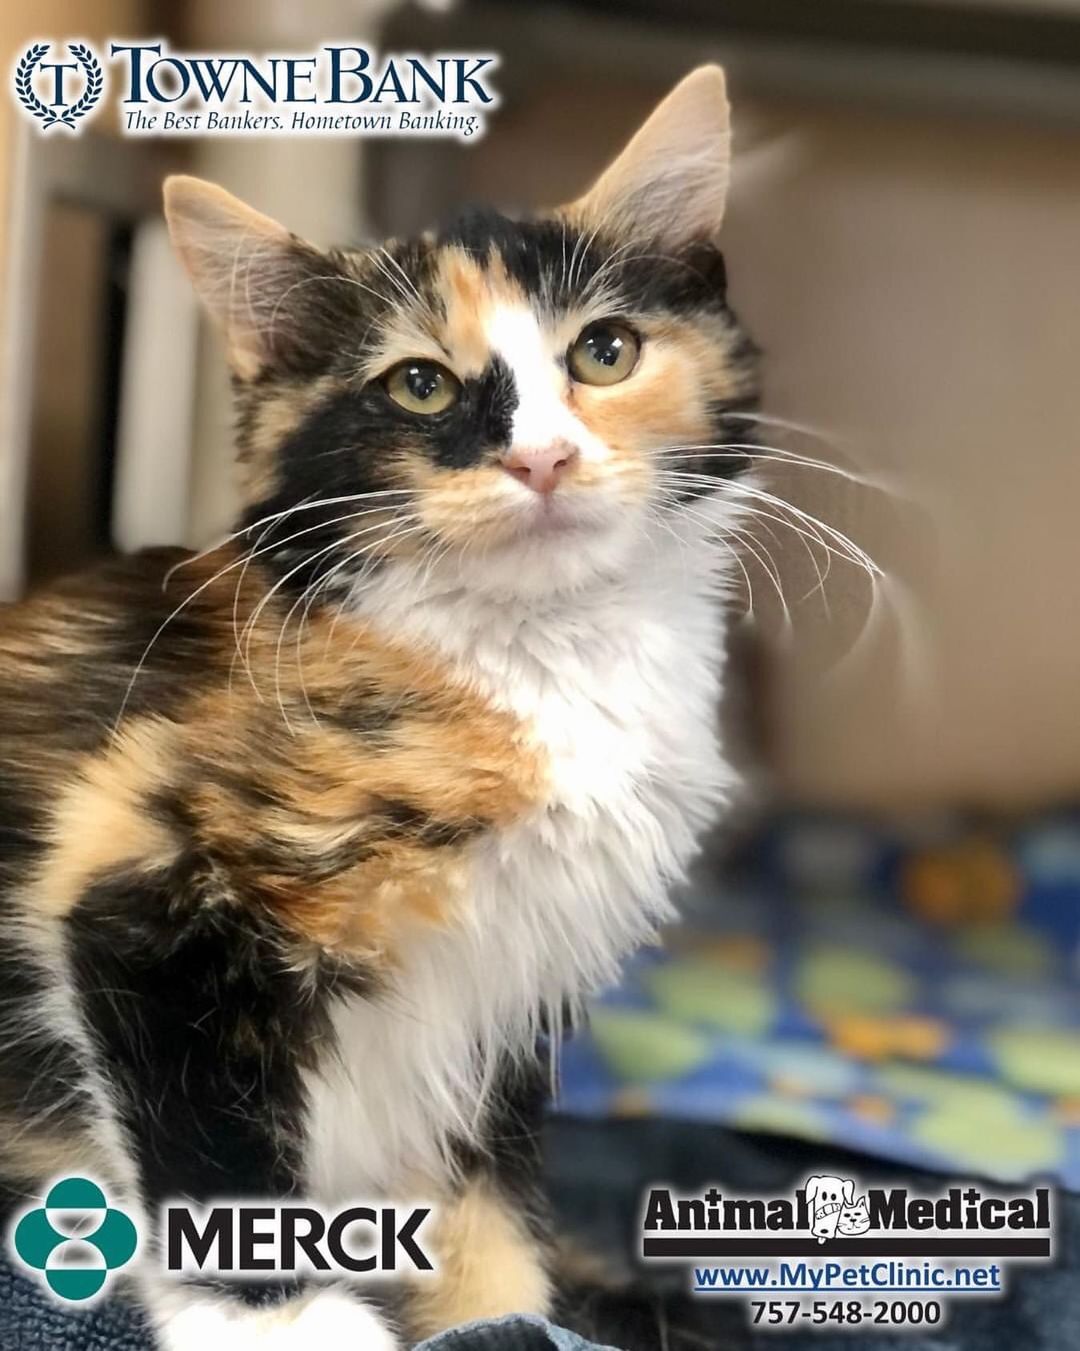 Let's give a warm welcome to the one and only Polly Pocket! This girl is new to our adoption floor but we have a feeling she will steal the hearts of her new family in no time. Polly Pocket is tiny in size but you wouldn’t know that by the size of her meow! She is a chatty gal who wants to make sure her voice is heard. This sweet kitten can’t wait to cuddle up with her new family who hopefully will provide her with lots of playtime and treats! If you want to add Polly Packet to your home, fill out an adoption application online or visit her during our adoption hours. https://bit.ly/3uIMZPd

Thank you to our Bark in the Park sponsors @animalmedicalofchesapeake @merck and @townebanksocial